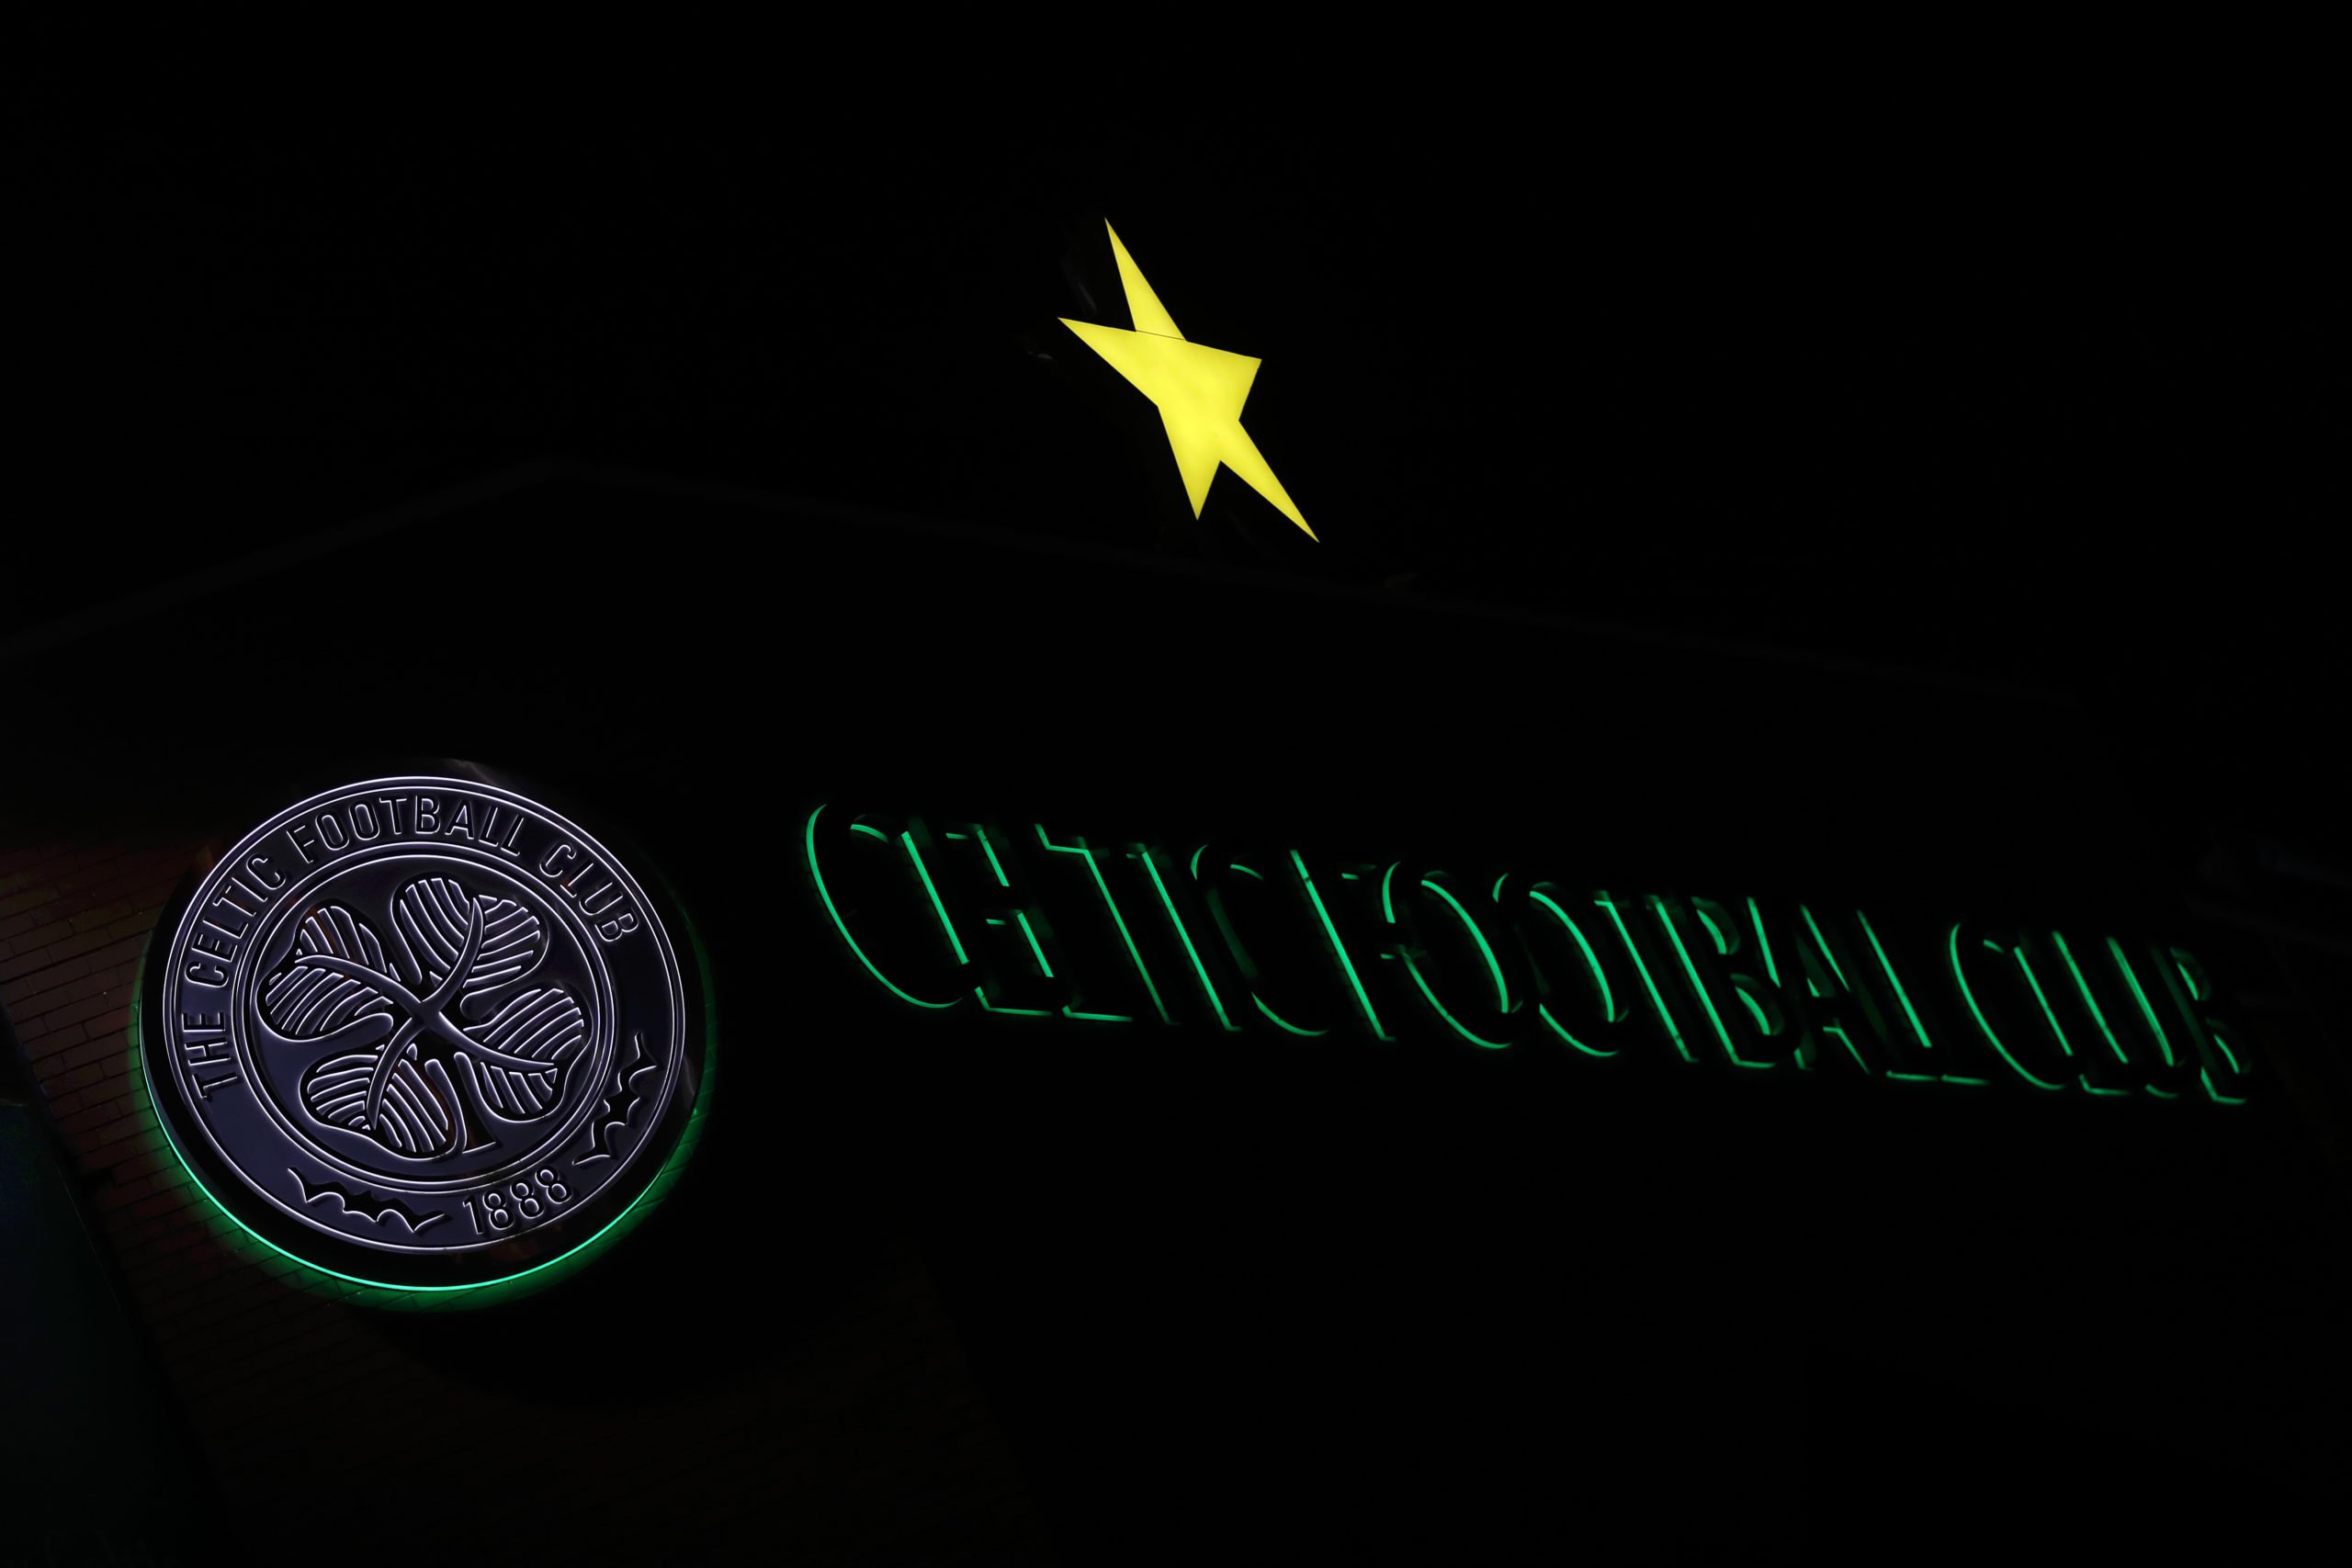 Updated Celtic confirmed signings, loans, exits for 2021/22